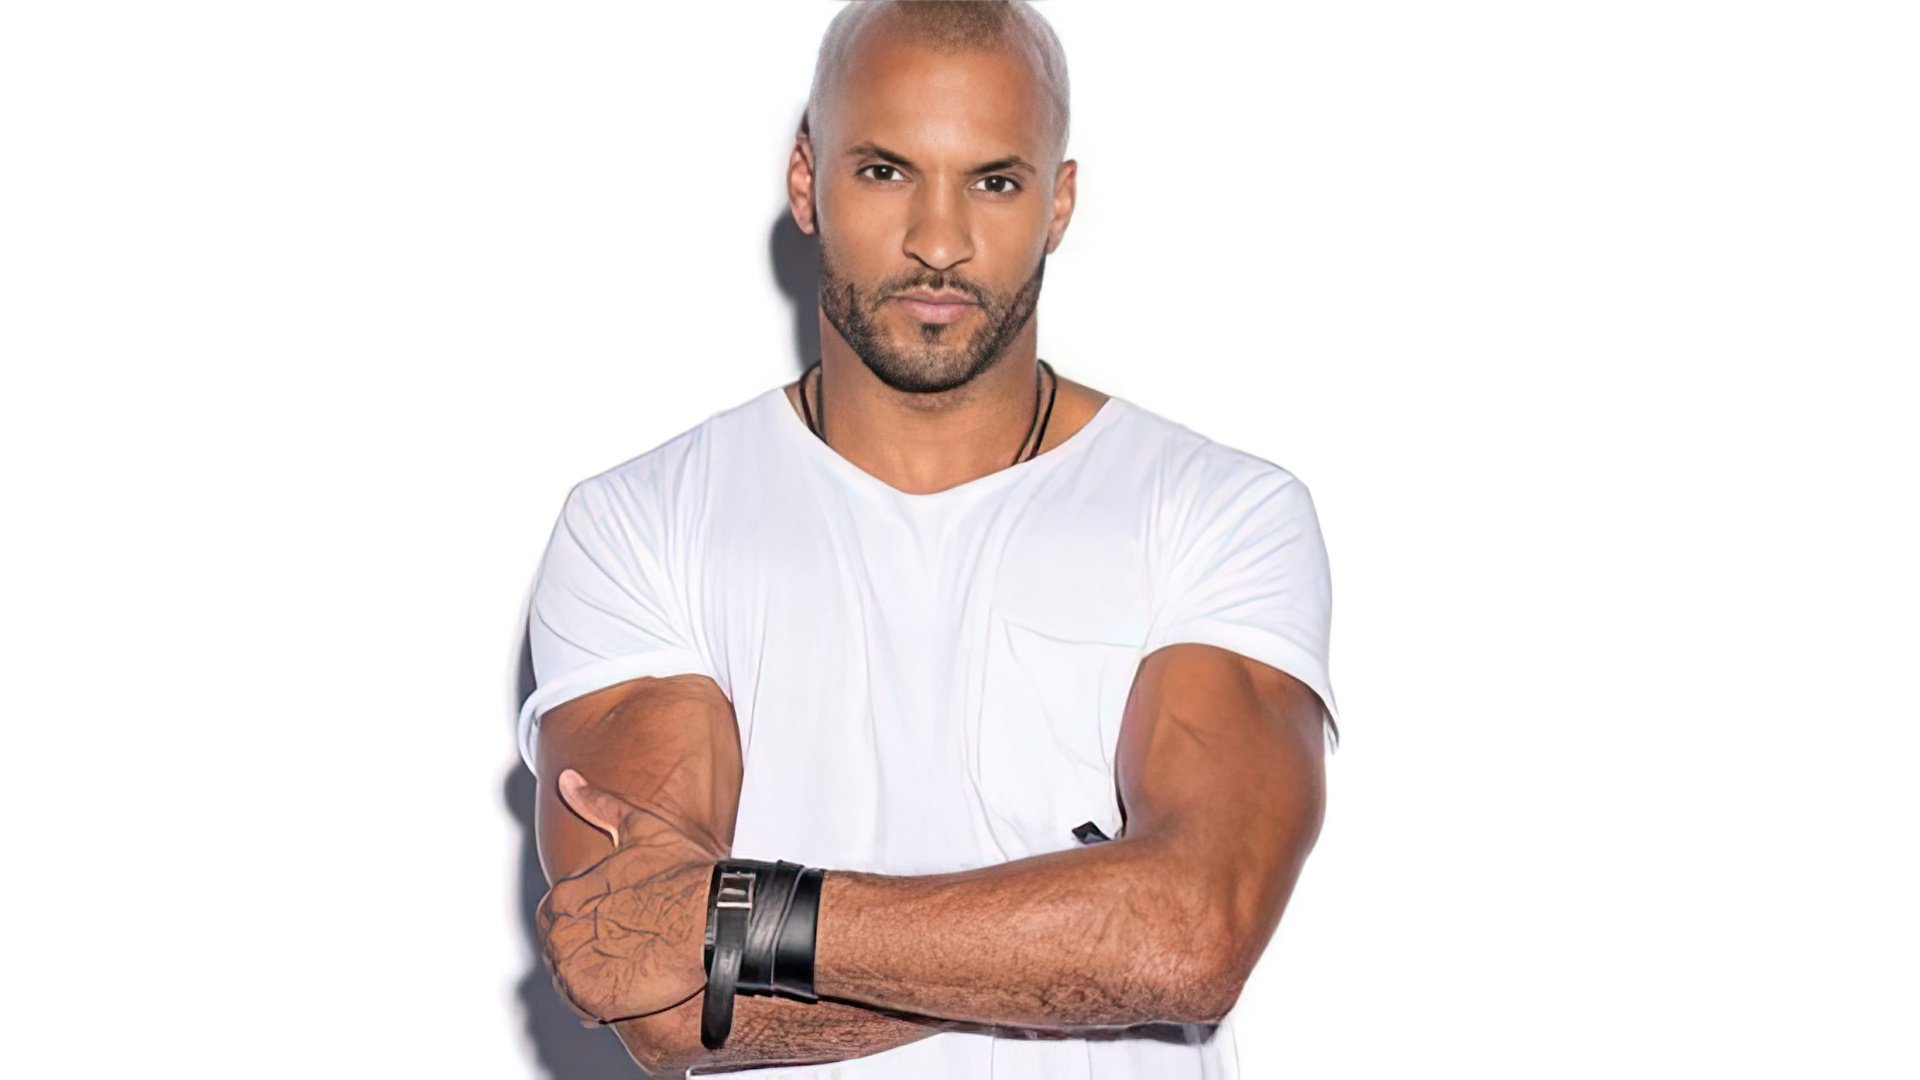 Ricky Whittle could have pursued a sports career